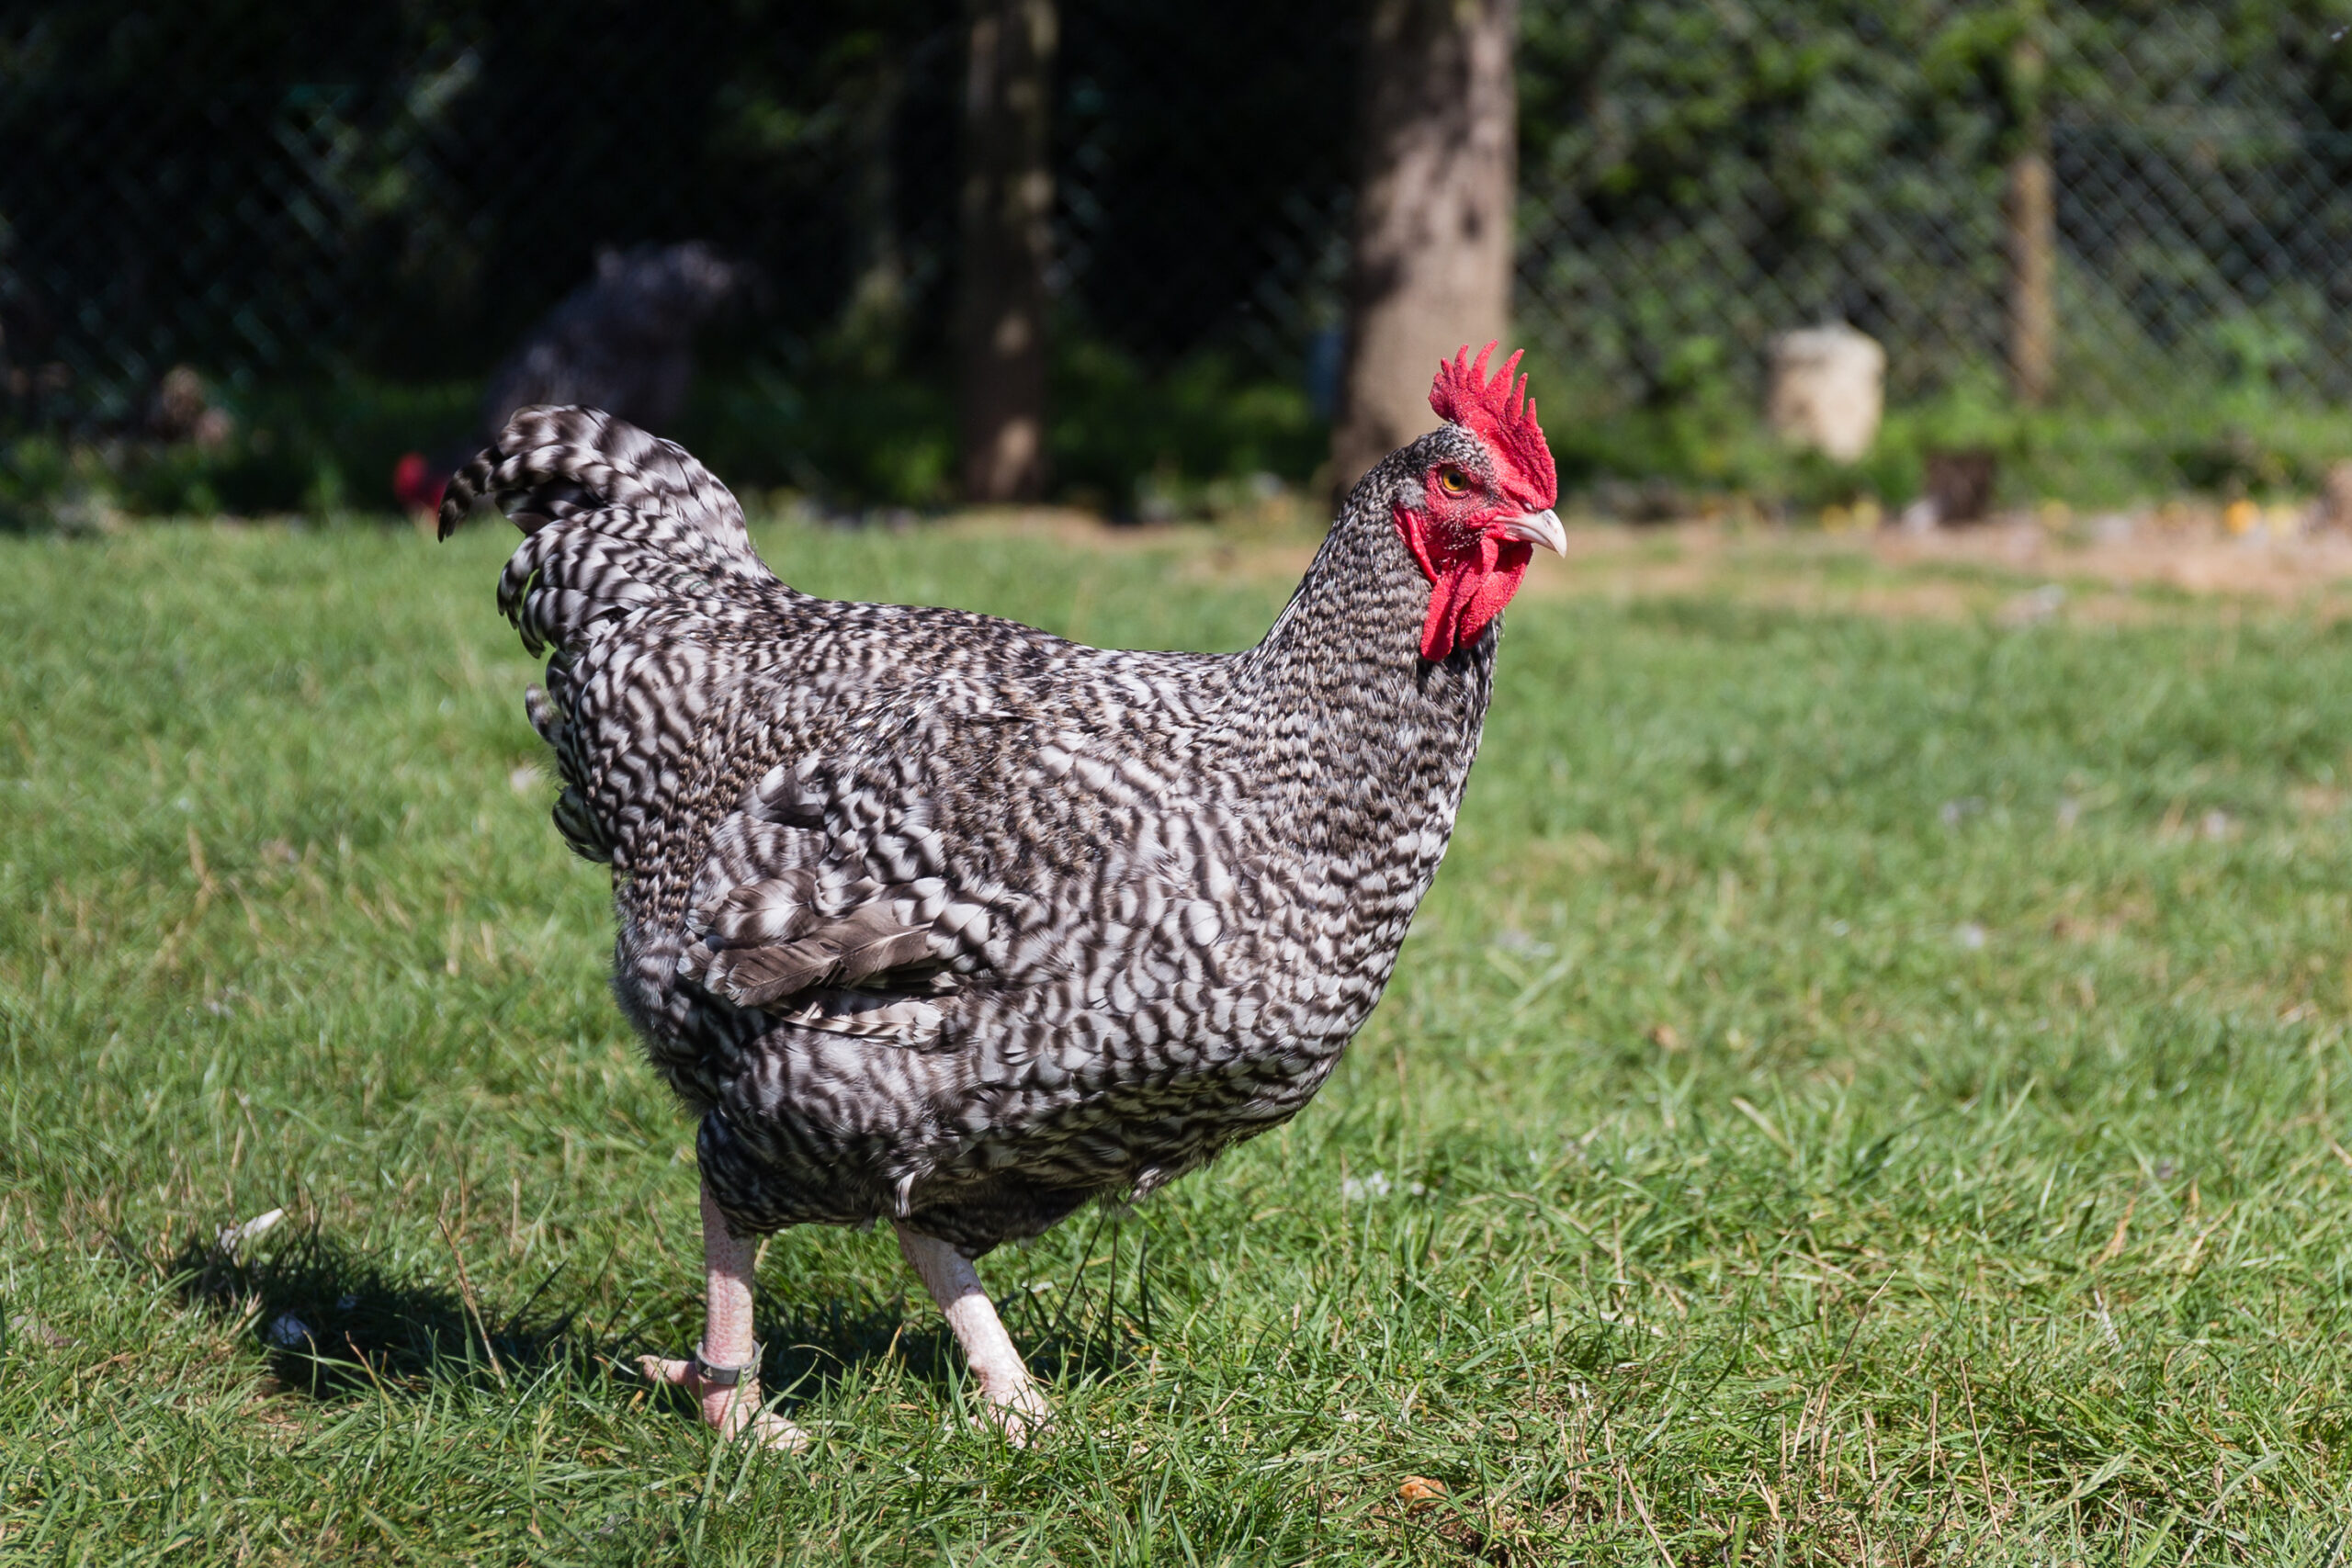 Coq coucou de Rennes is one example of striped feather characteristic as a result of of sex-linked barring. Photo: Édouard Hue